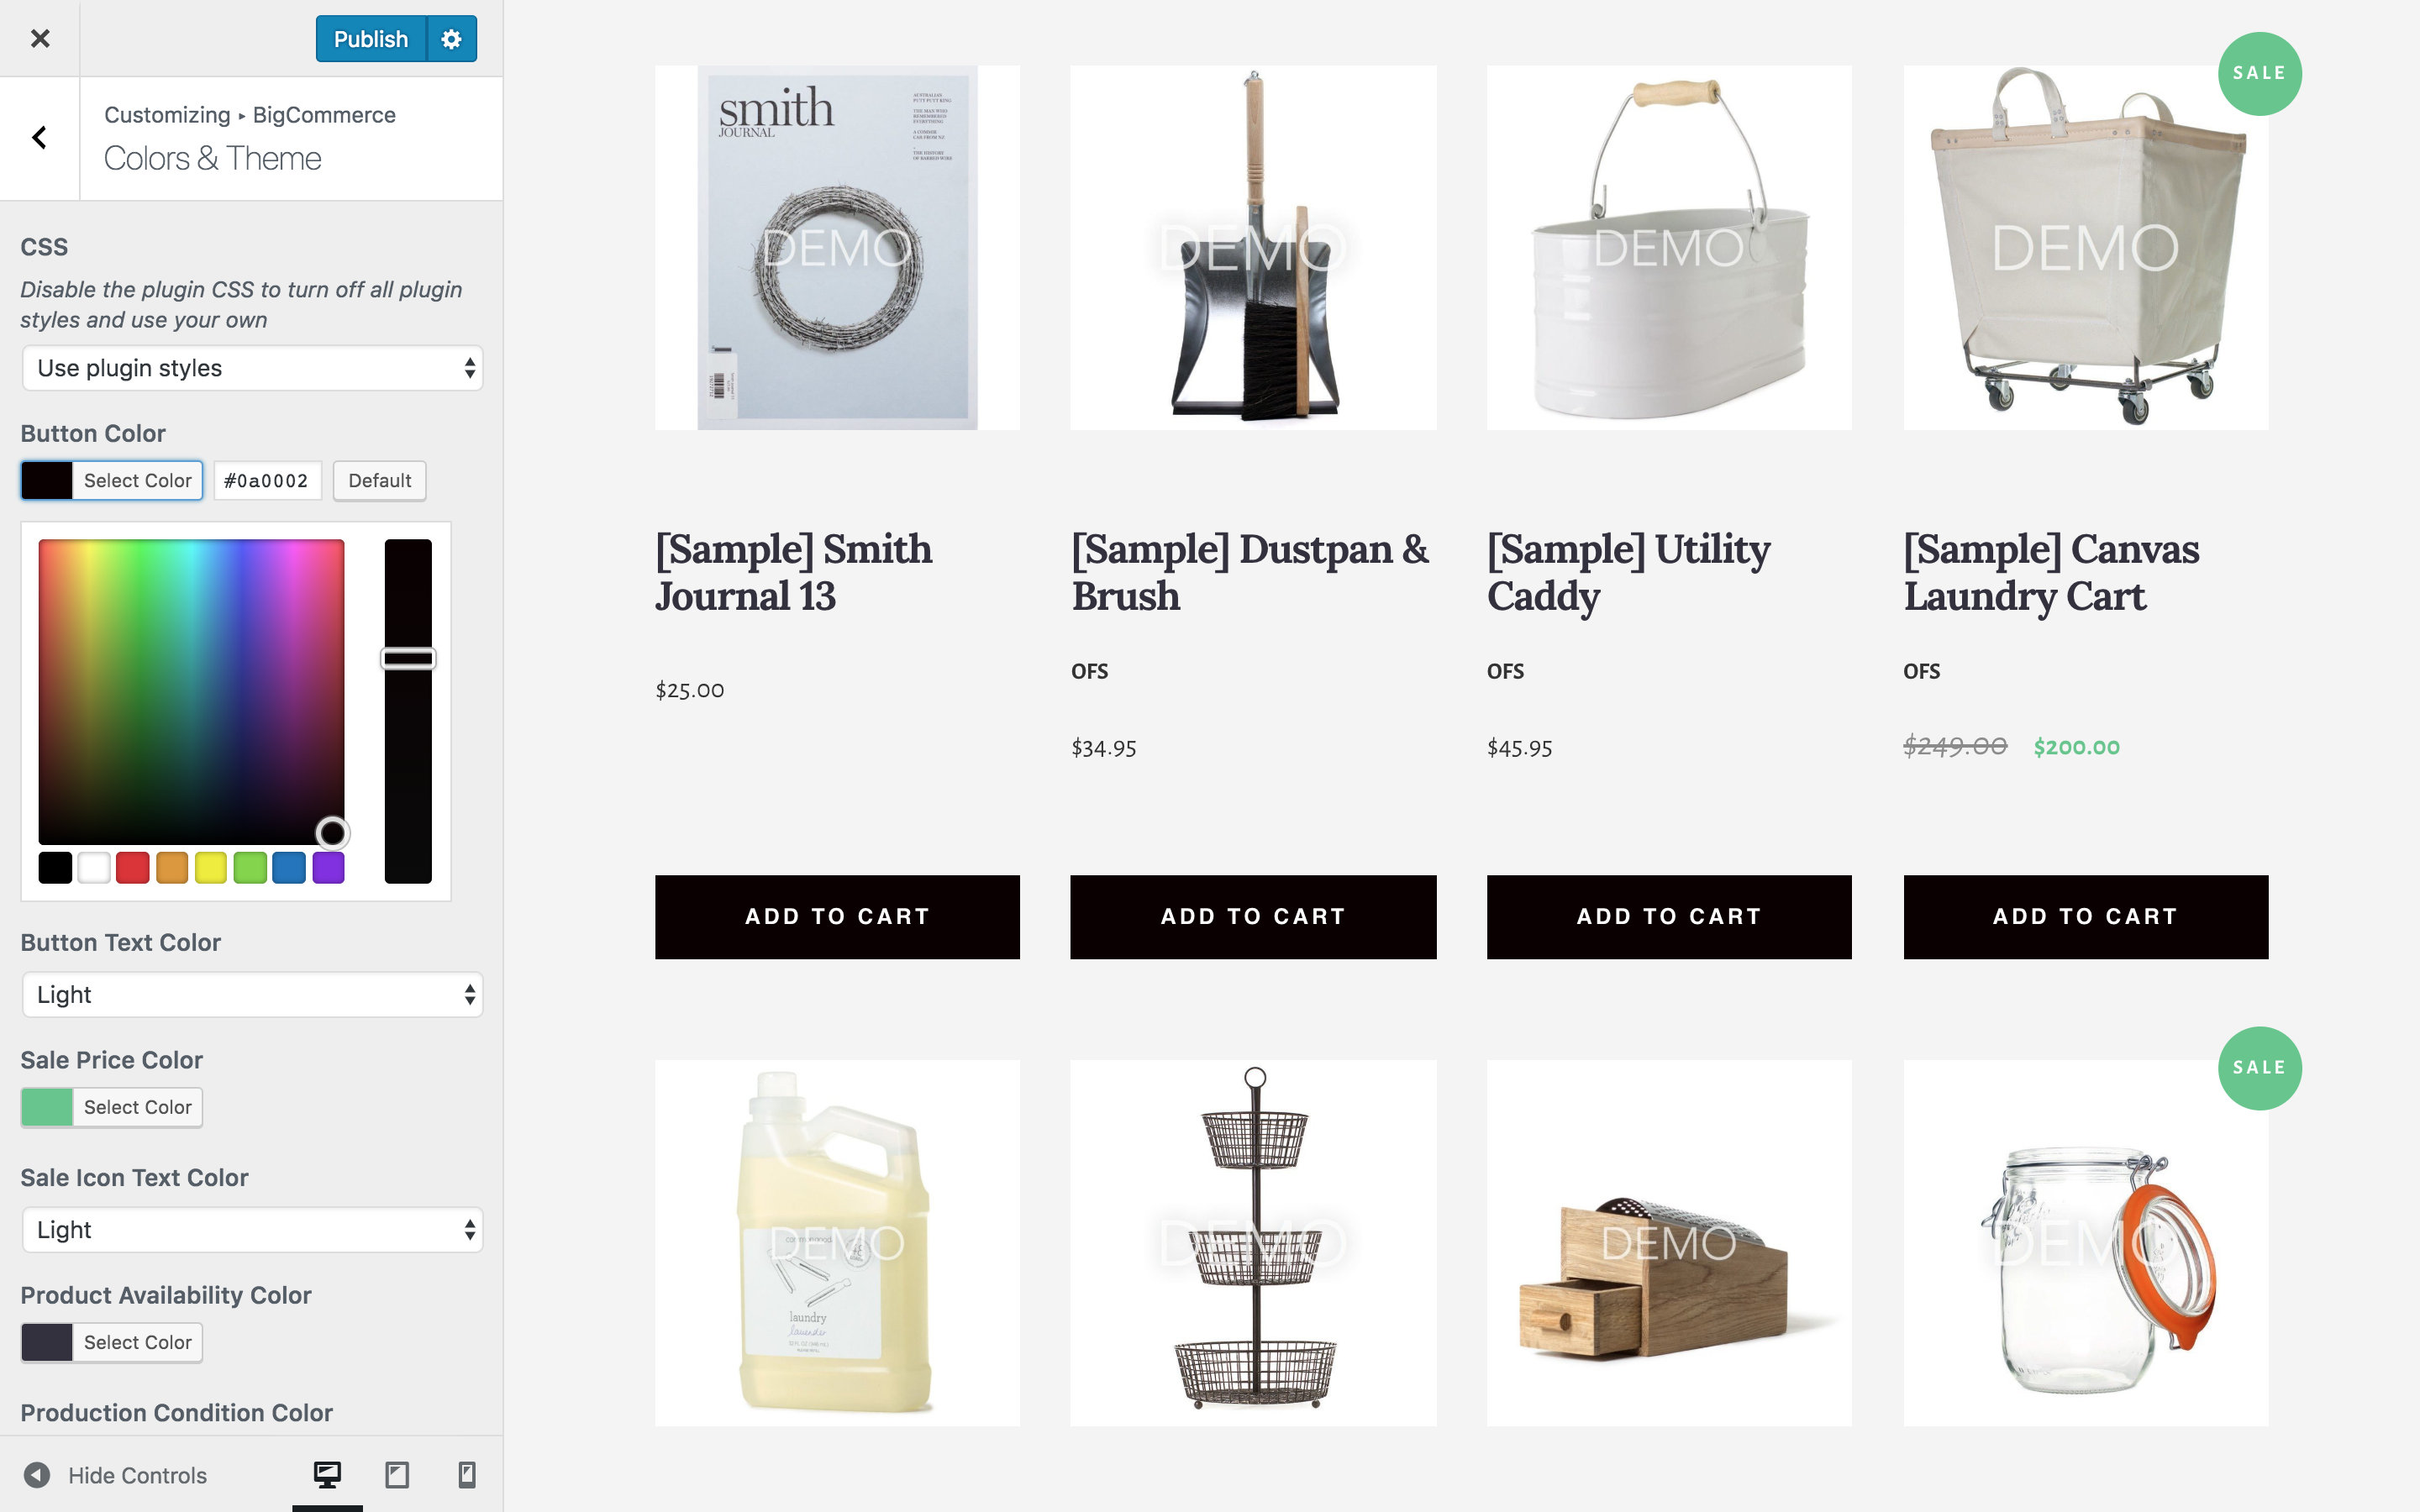 Product pages are automatically created for products